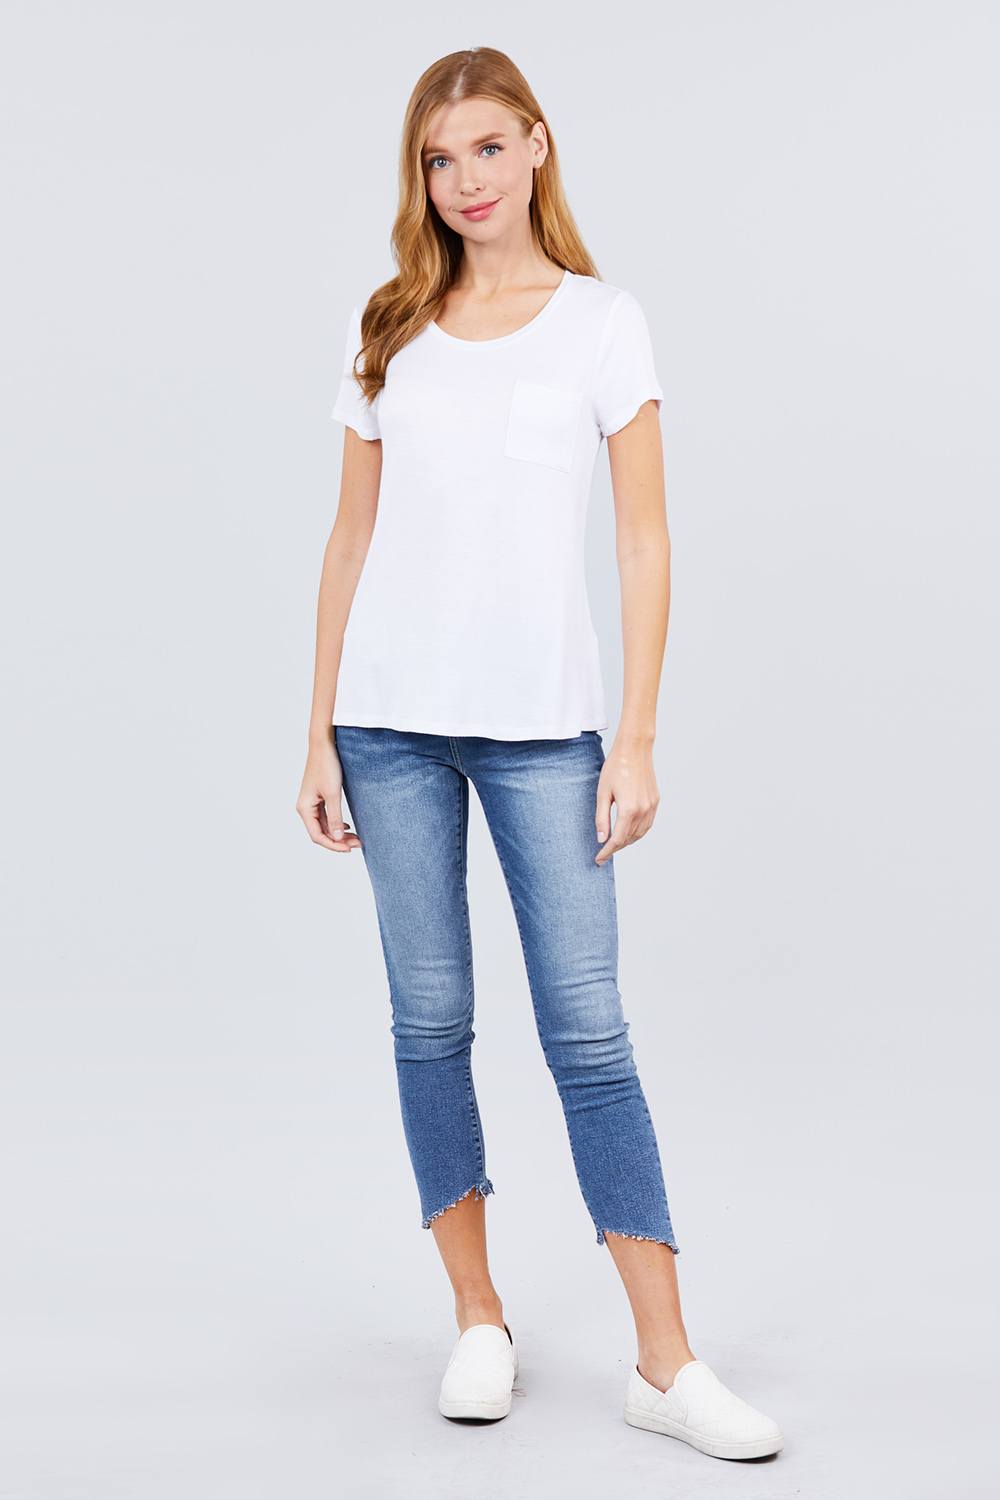 Load image into Gallery viewer, Glow Fashion Boutique Basic White T-Shirt
